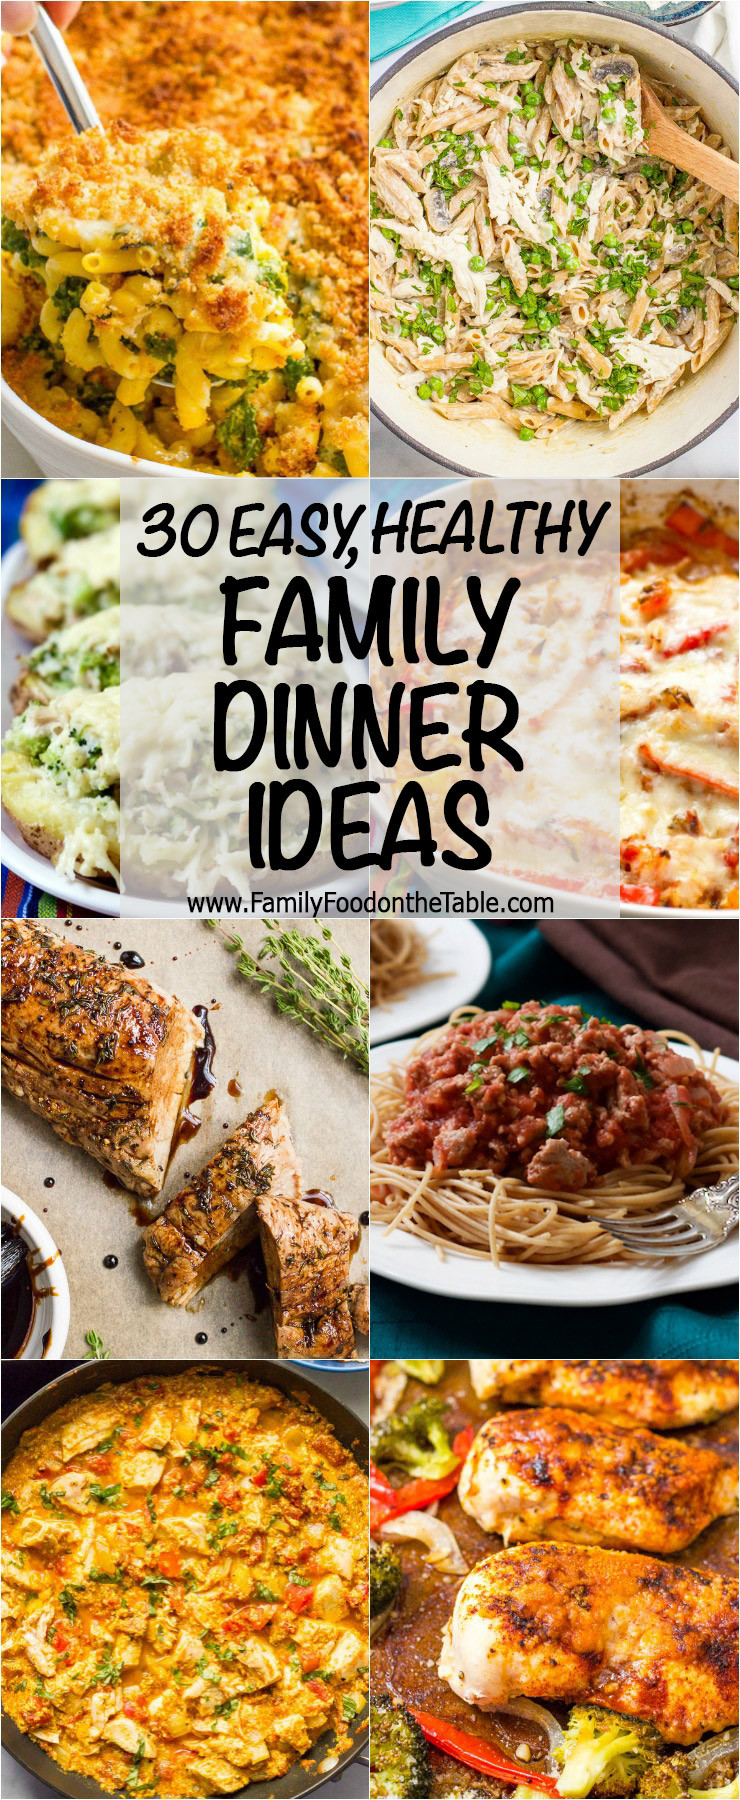 Easy Healthy Dinners For Family
 30 easy healthy family dinner ideas Family Food on the Table